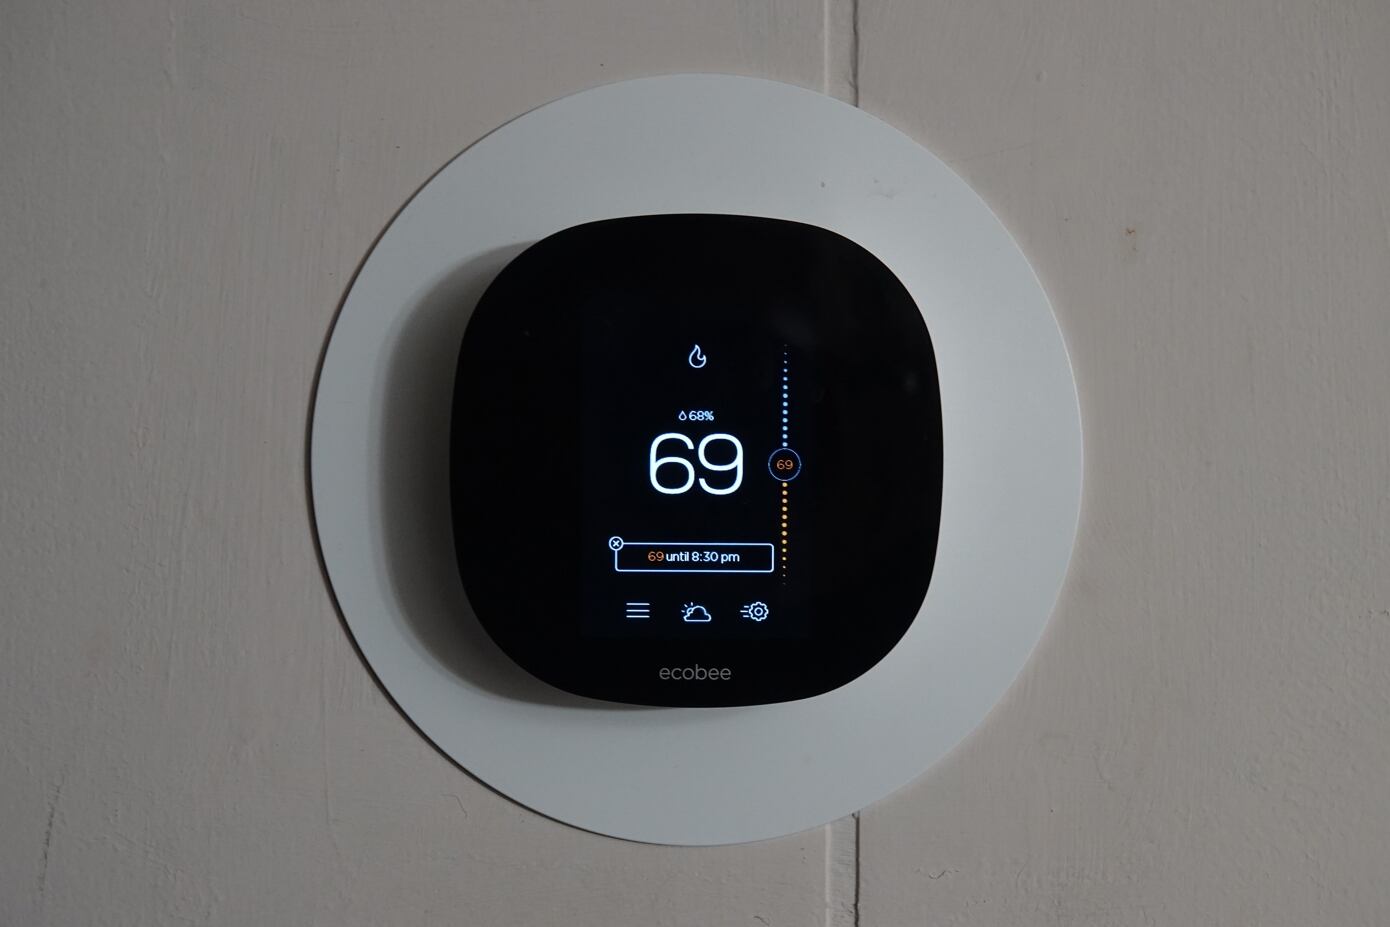 Purchase a Smart Thermostat as Your Next Self-gift